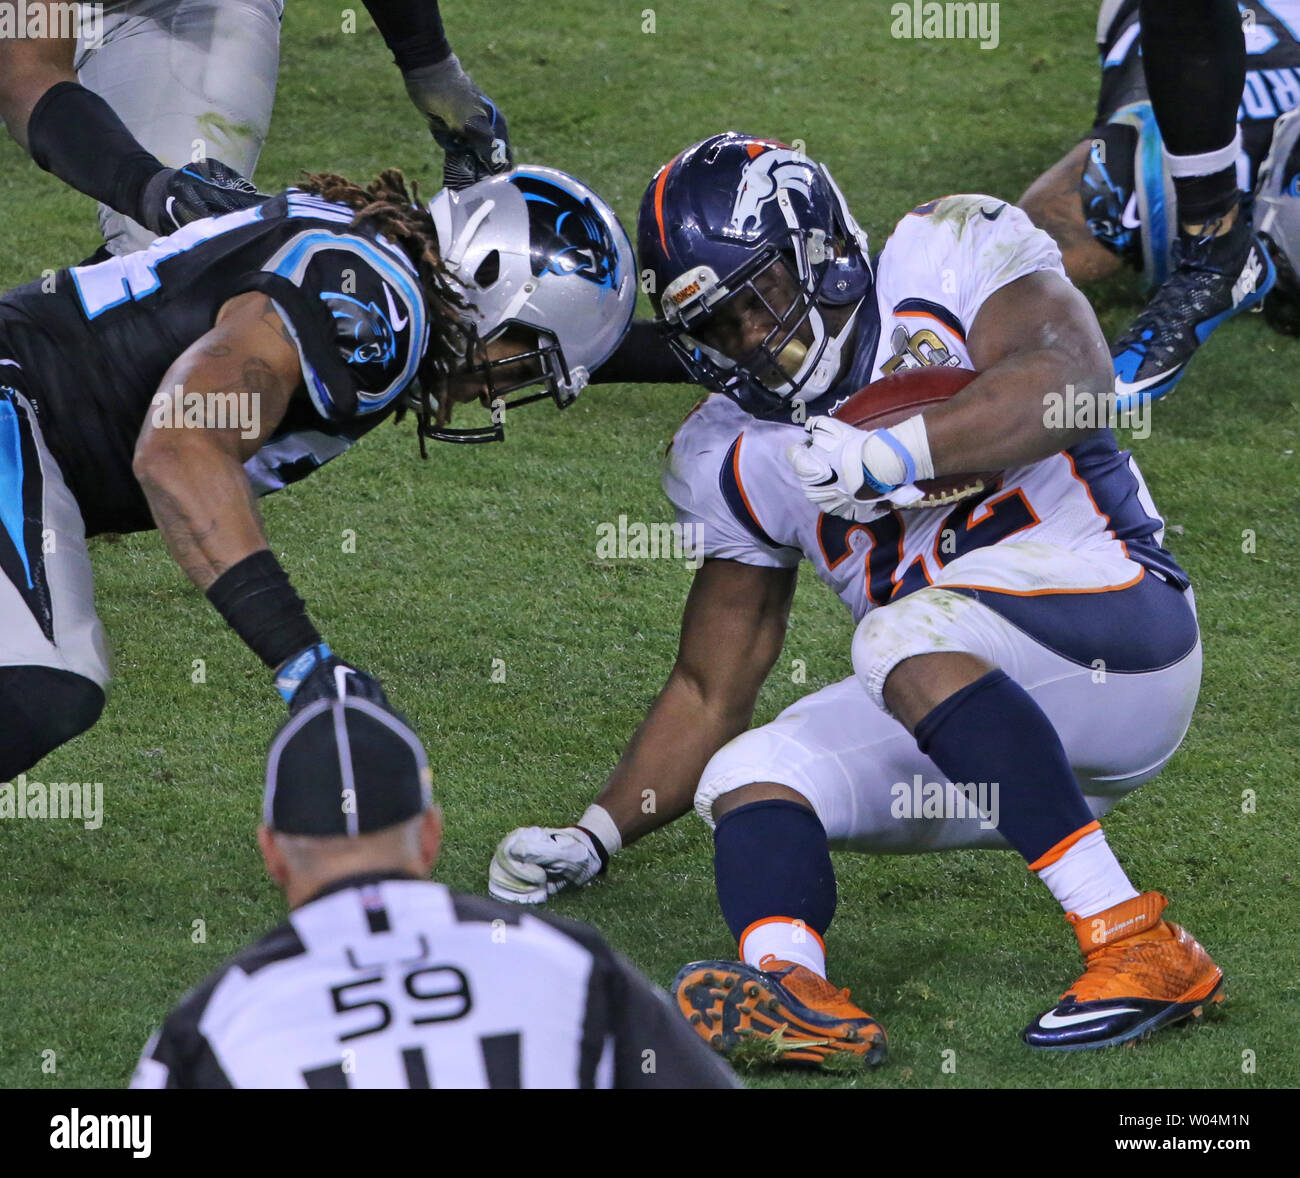 Carolina Panthers Kony Ealy (L) goes helmet to helmet with Denver Broncos C.J. Anderson (22) after a short gain in the fourth quarter of Super Bowl 50 at Levi's Stadium in Santa Clara, California, February 7, 2015.  The Denver Broncos defeated the Carolina Panthers 24-10.     Photo by Khaled Sayed/UPI Stock Photo